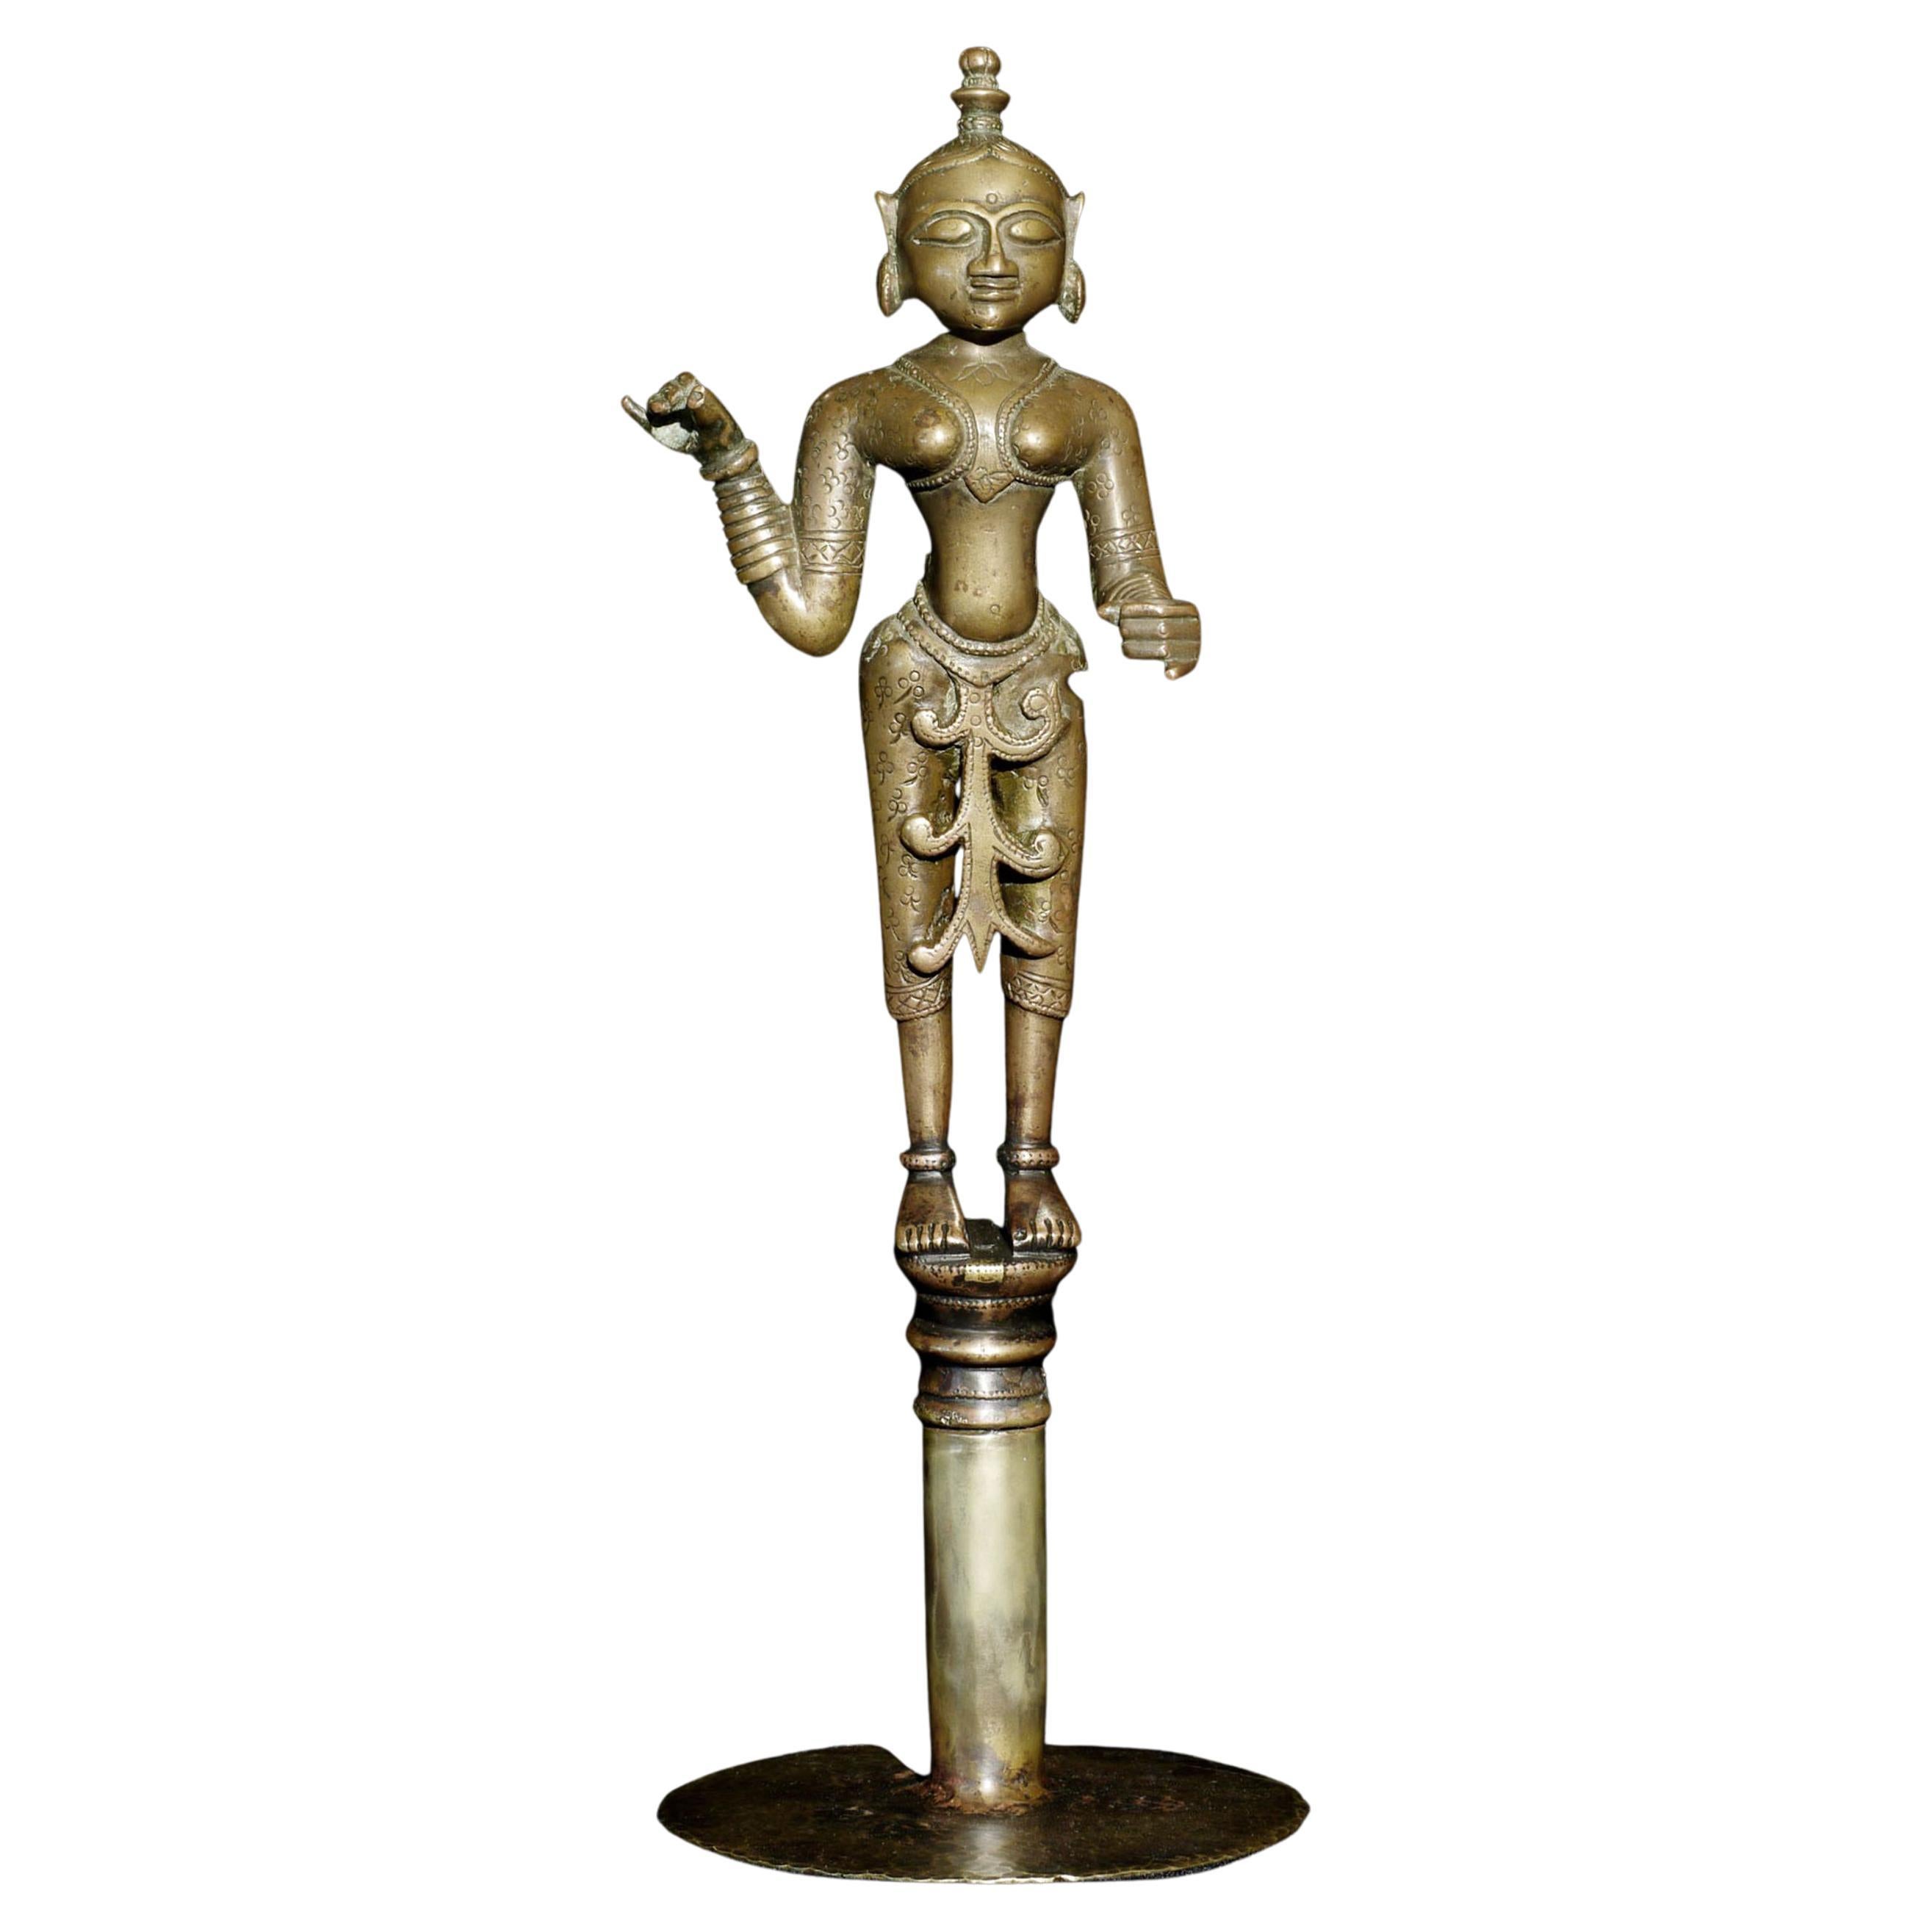 Extraordinary solid cast Indian bronze goddess. Head to toe, the height is 9.25. Atop the custom base, the total height is 14 1/8